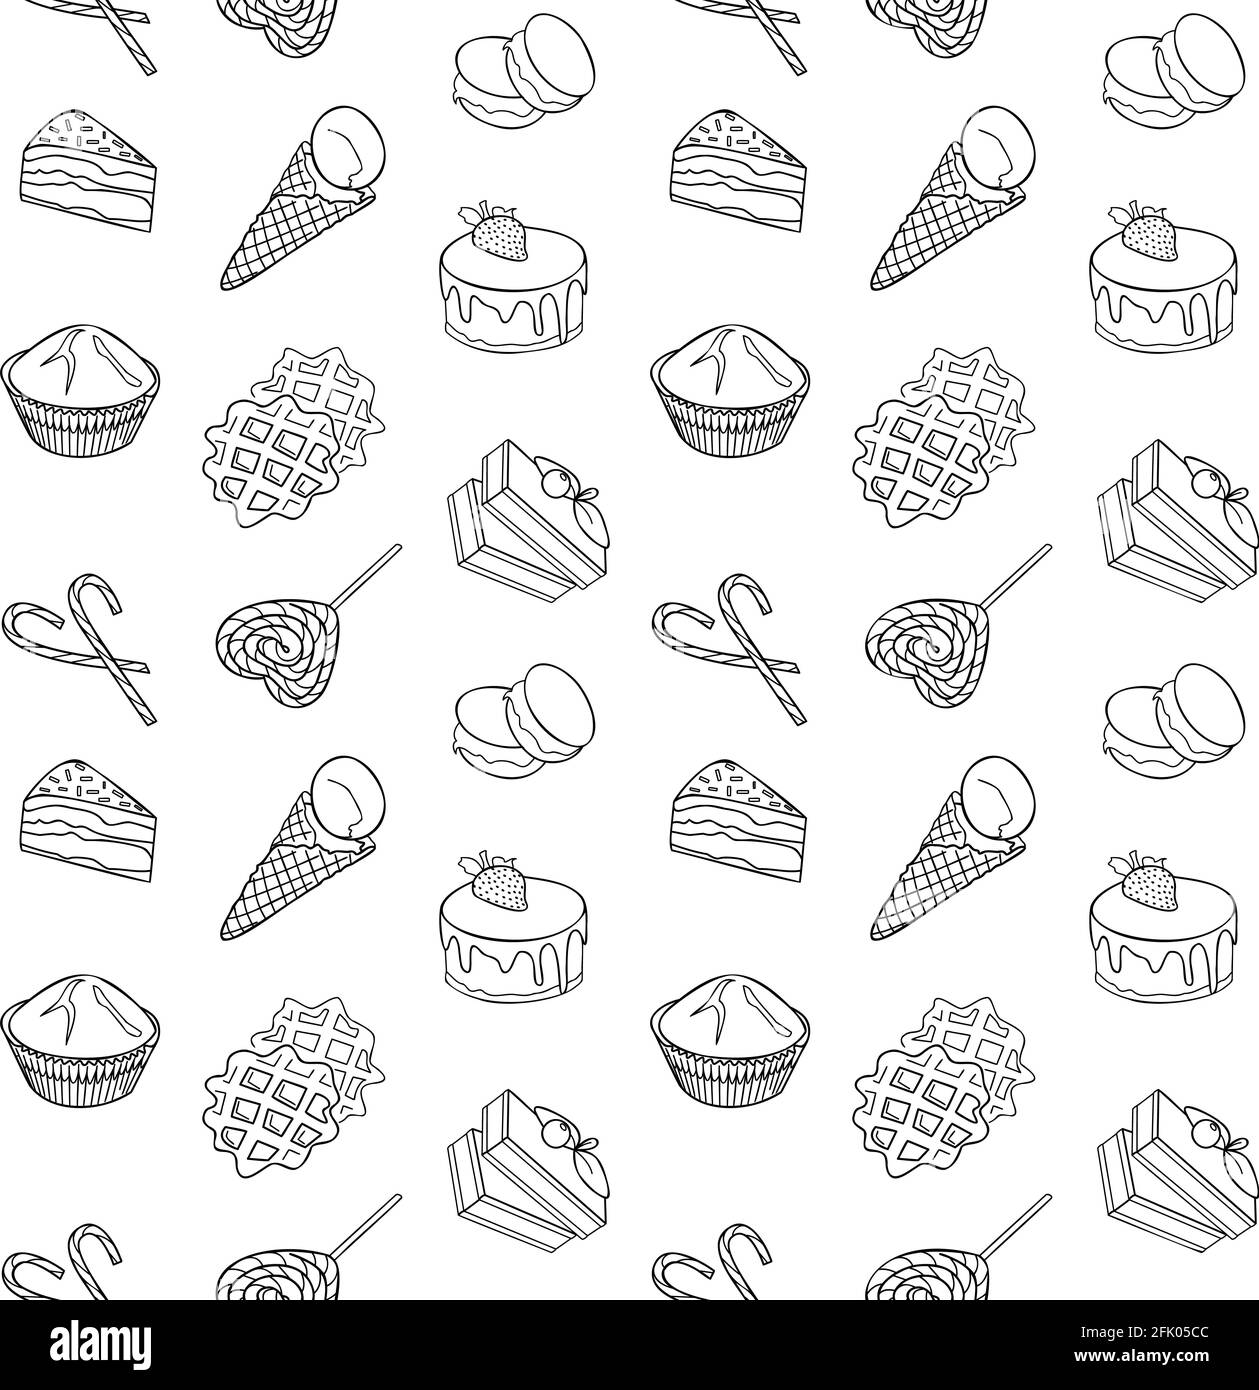 food item black outline hand drawn seamless pattern, set of bakery, sweets collection candy cane, cupcake, macaroon, icecream, pie kitchen design vect Stock Vector